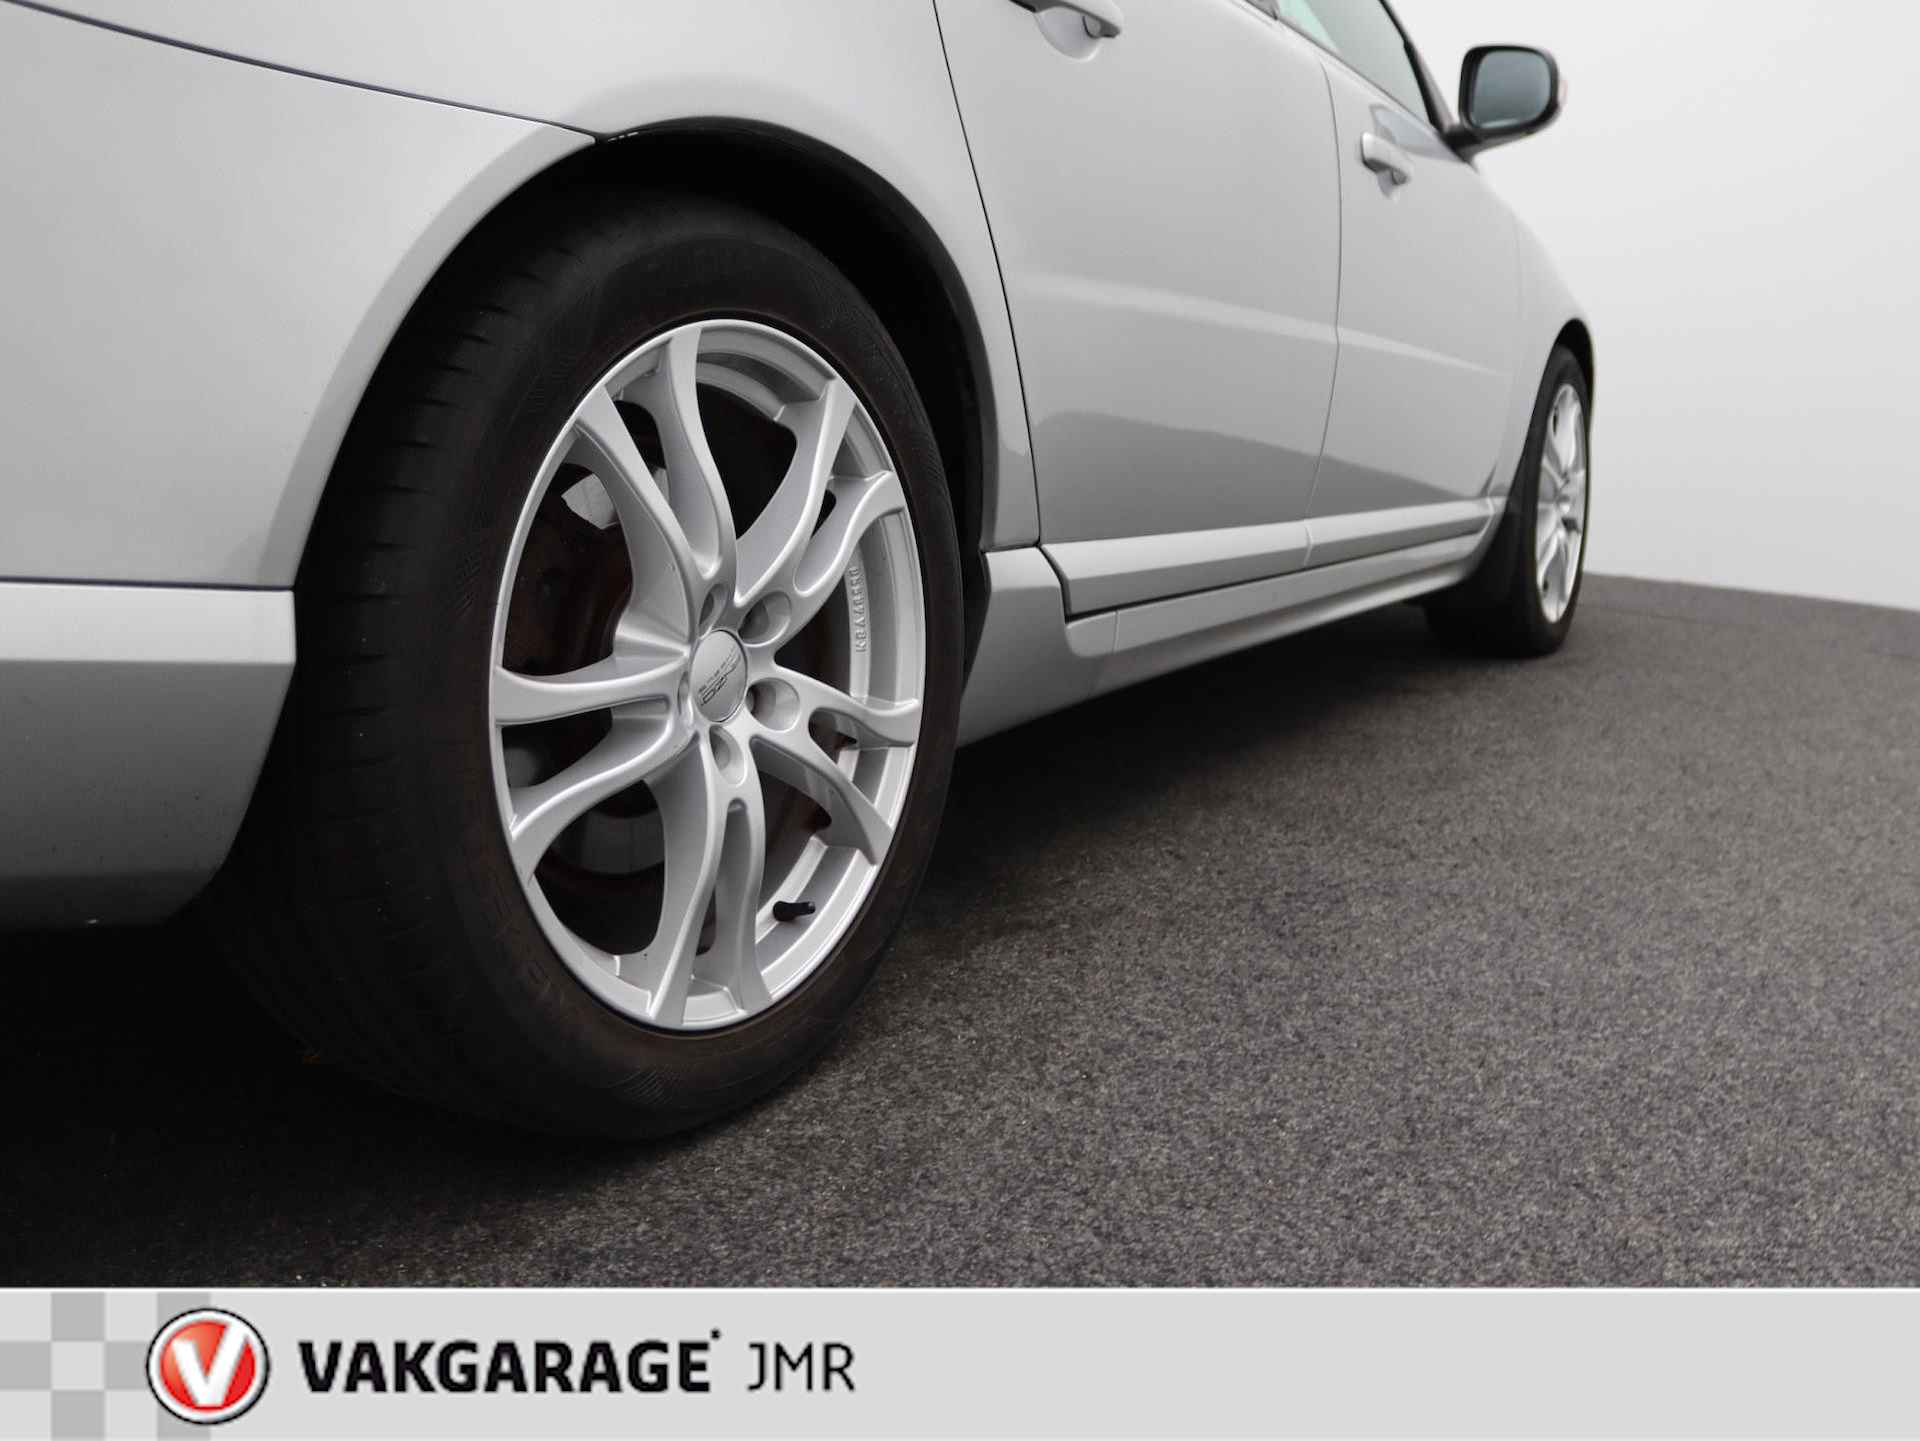 Volvo V70 2.5FT Momentum Youngtimer Trekhaak - PDC Achter - Stoel + Achterbank verwarming - Bluetooth - Climate en Cruise Control - 37/39